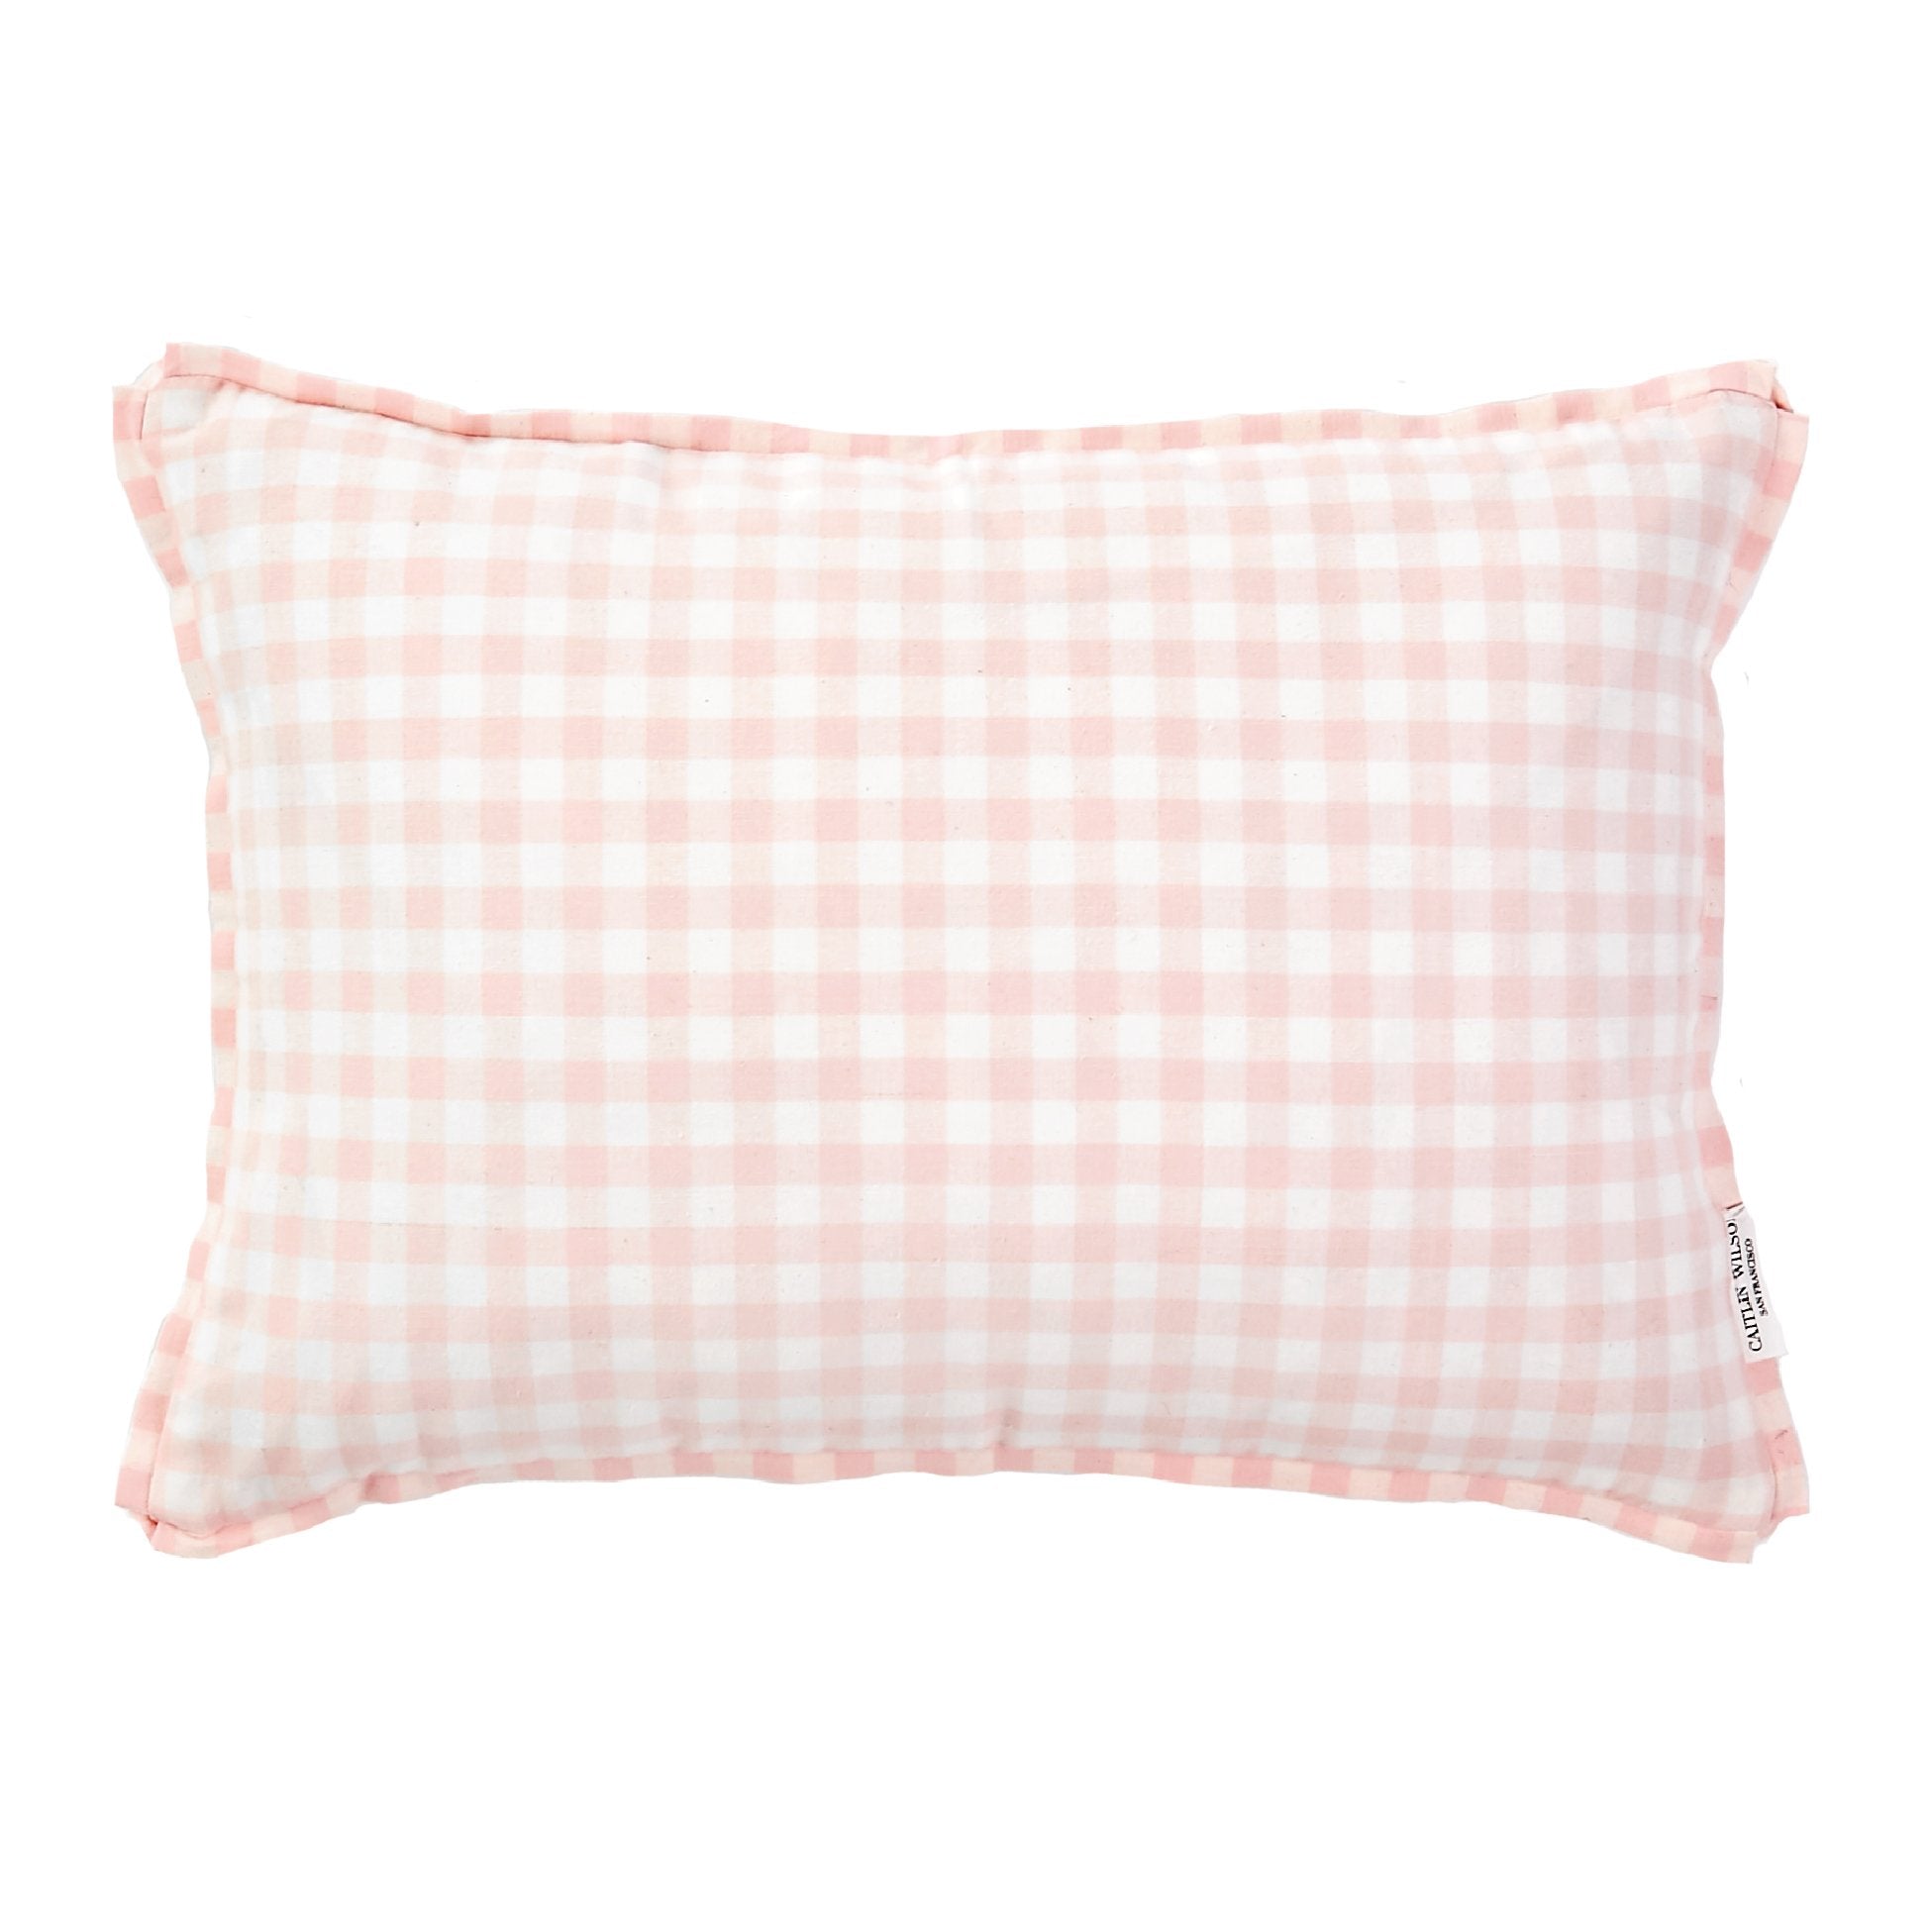 Blush Gingham Pillow with French Welt